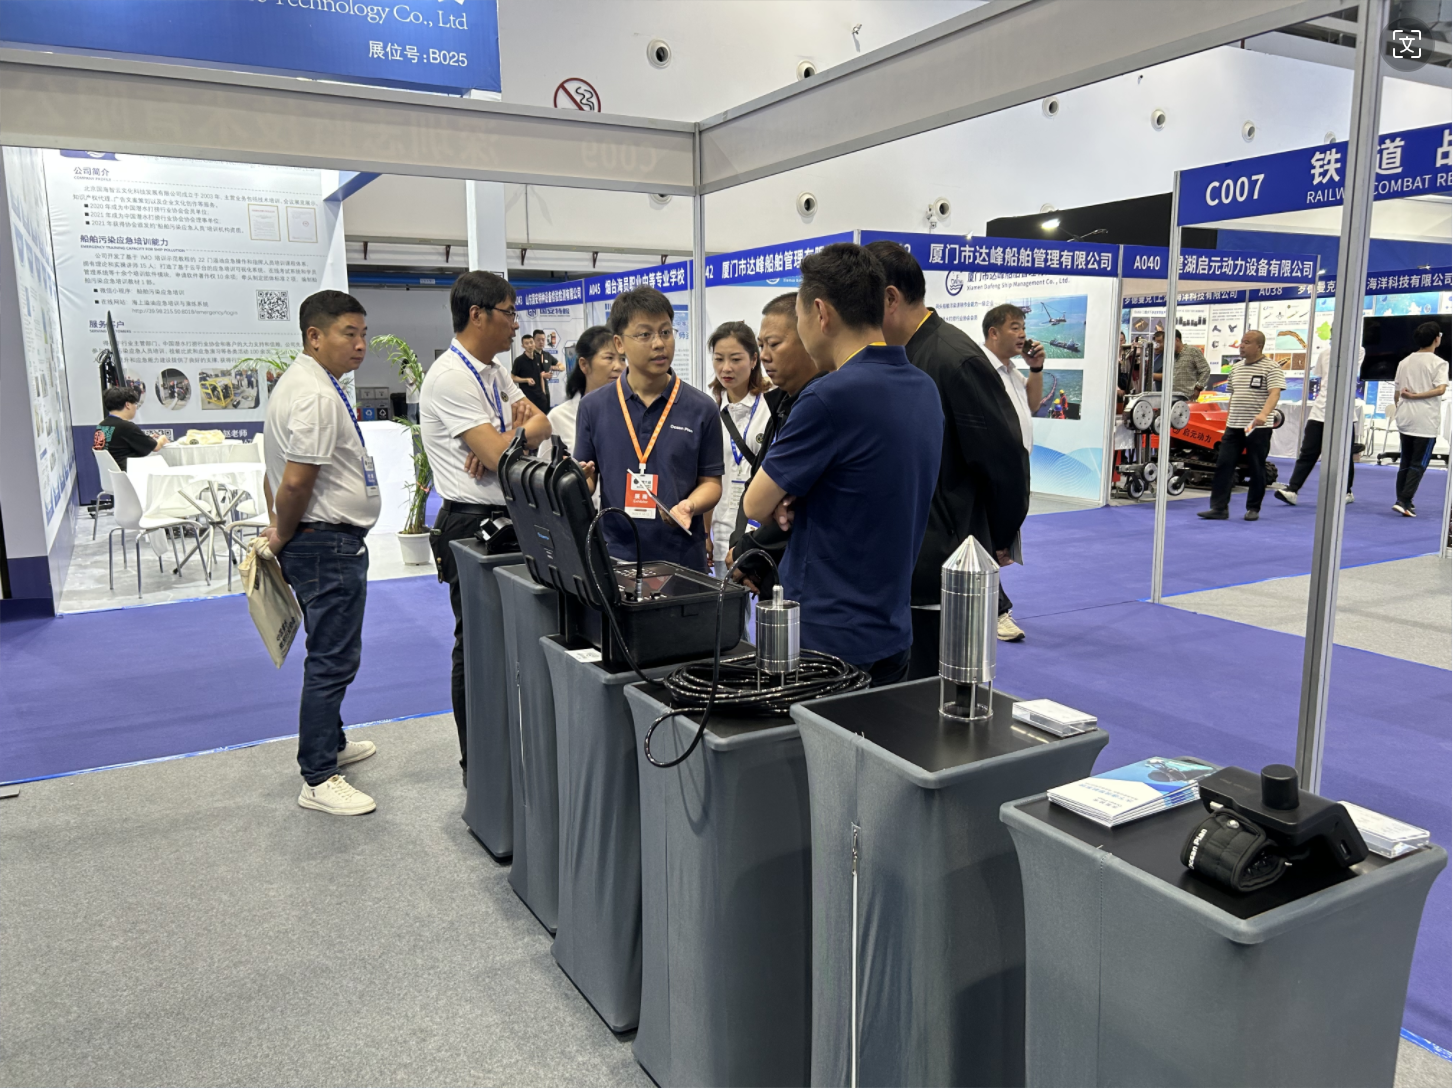 The 6th International Underwater Operations & Offshore Industry Expo